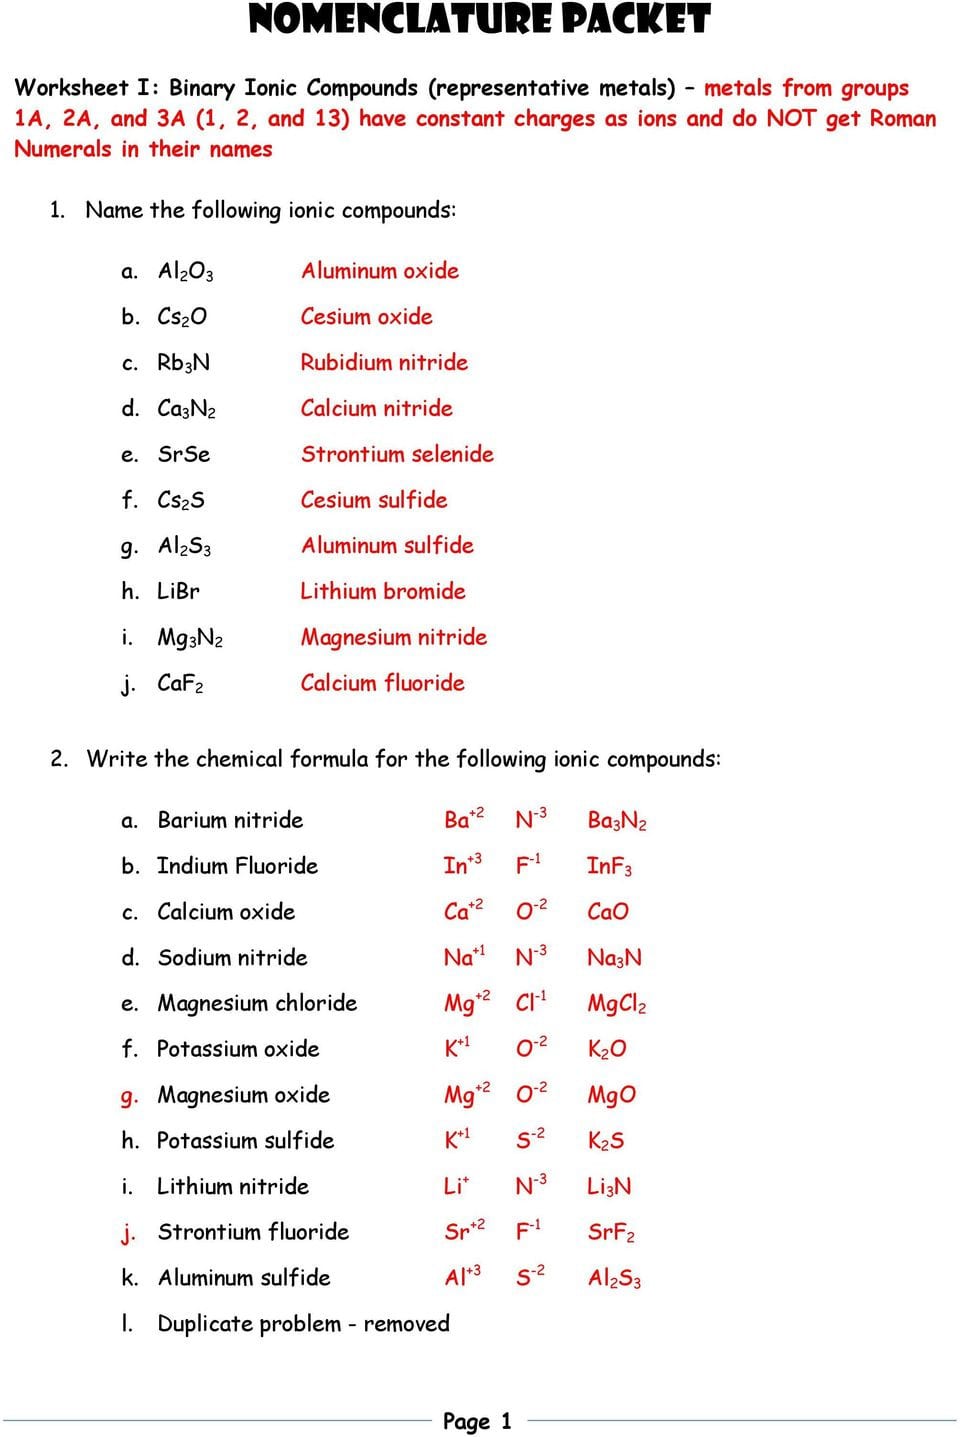 Chemical Formulas And Names Of Ionic Compounds Worksheet — db-excel.com